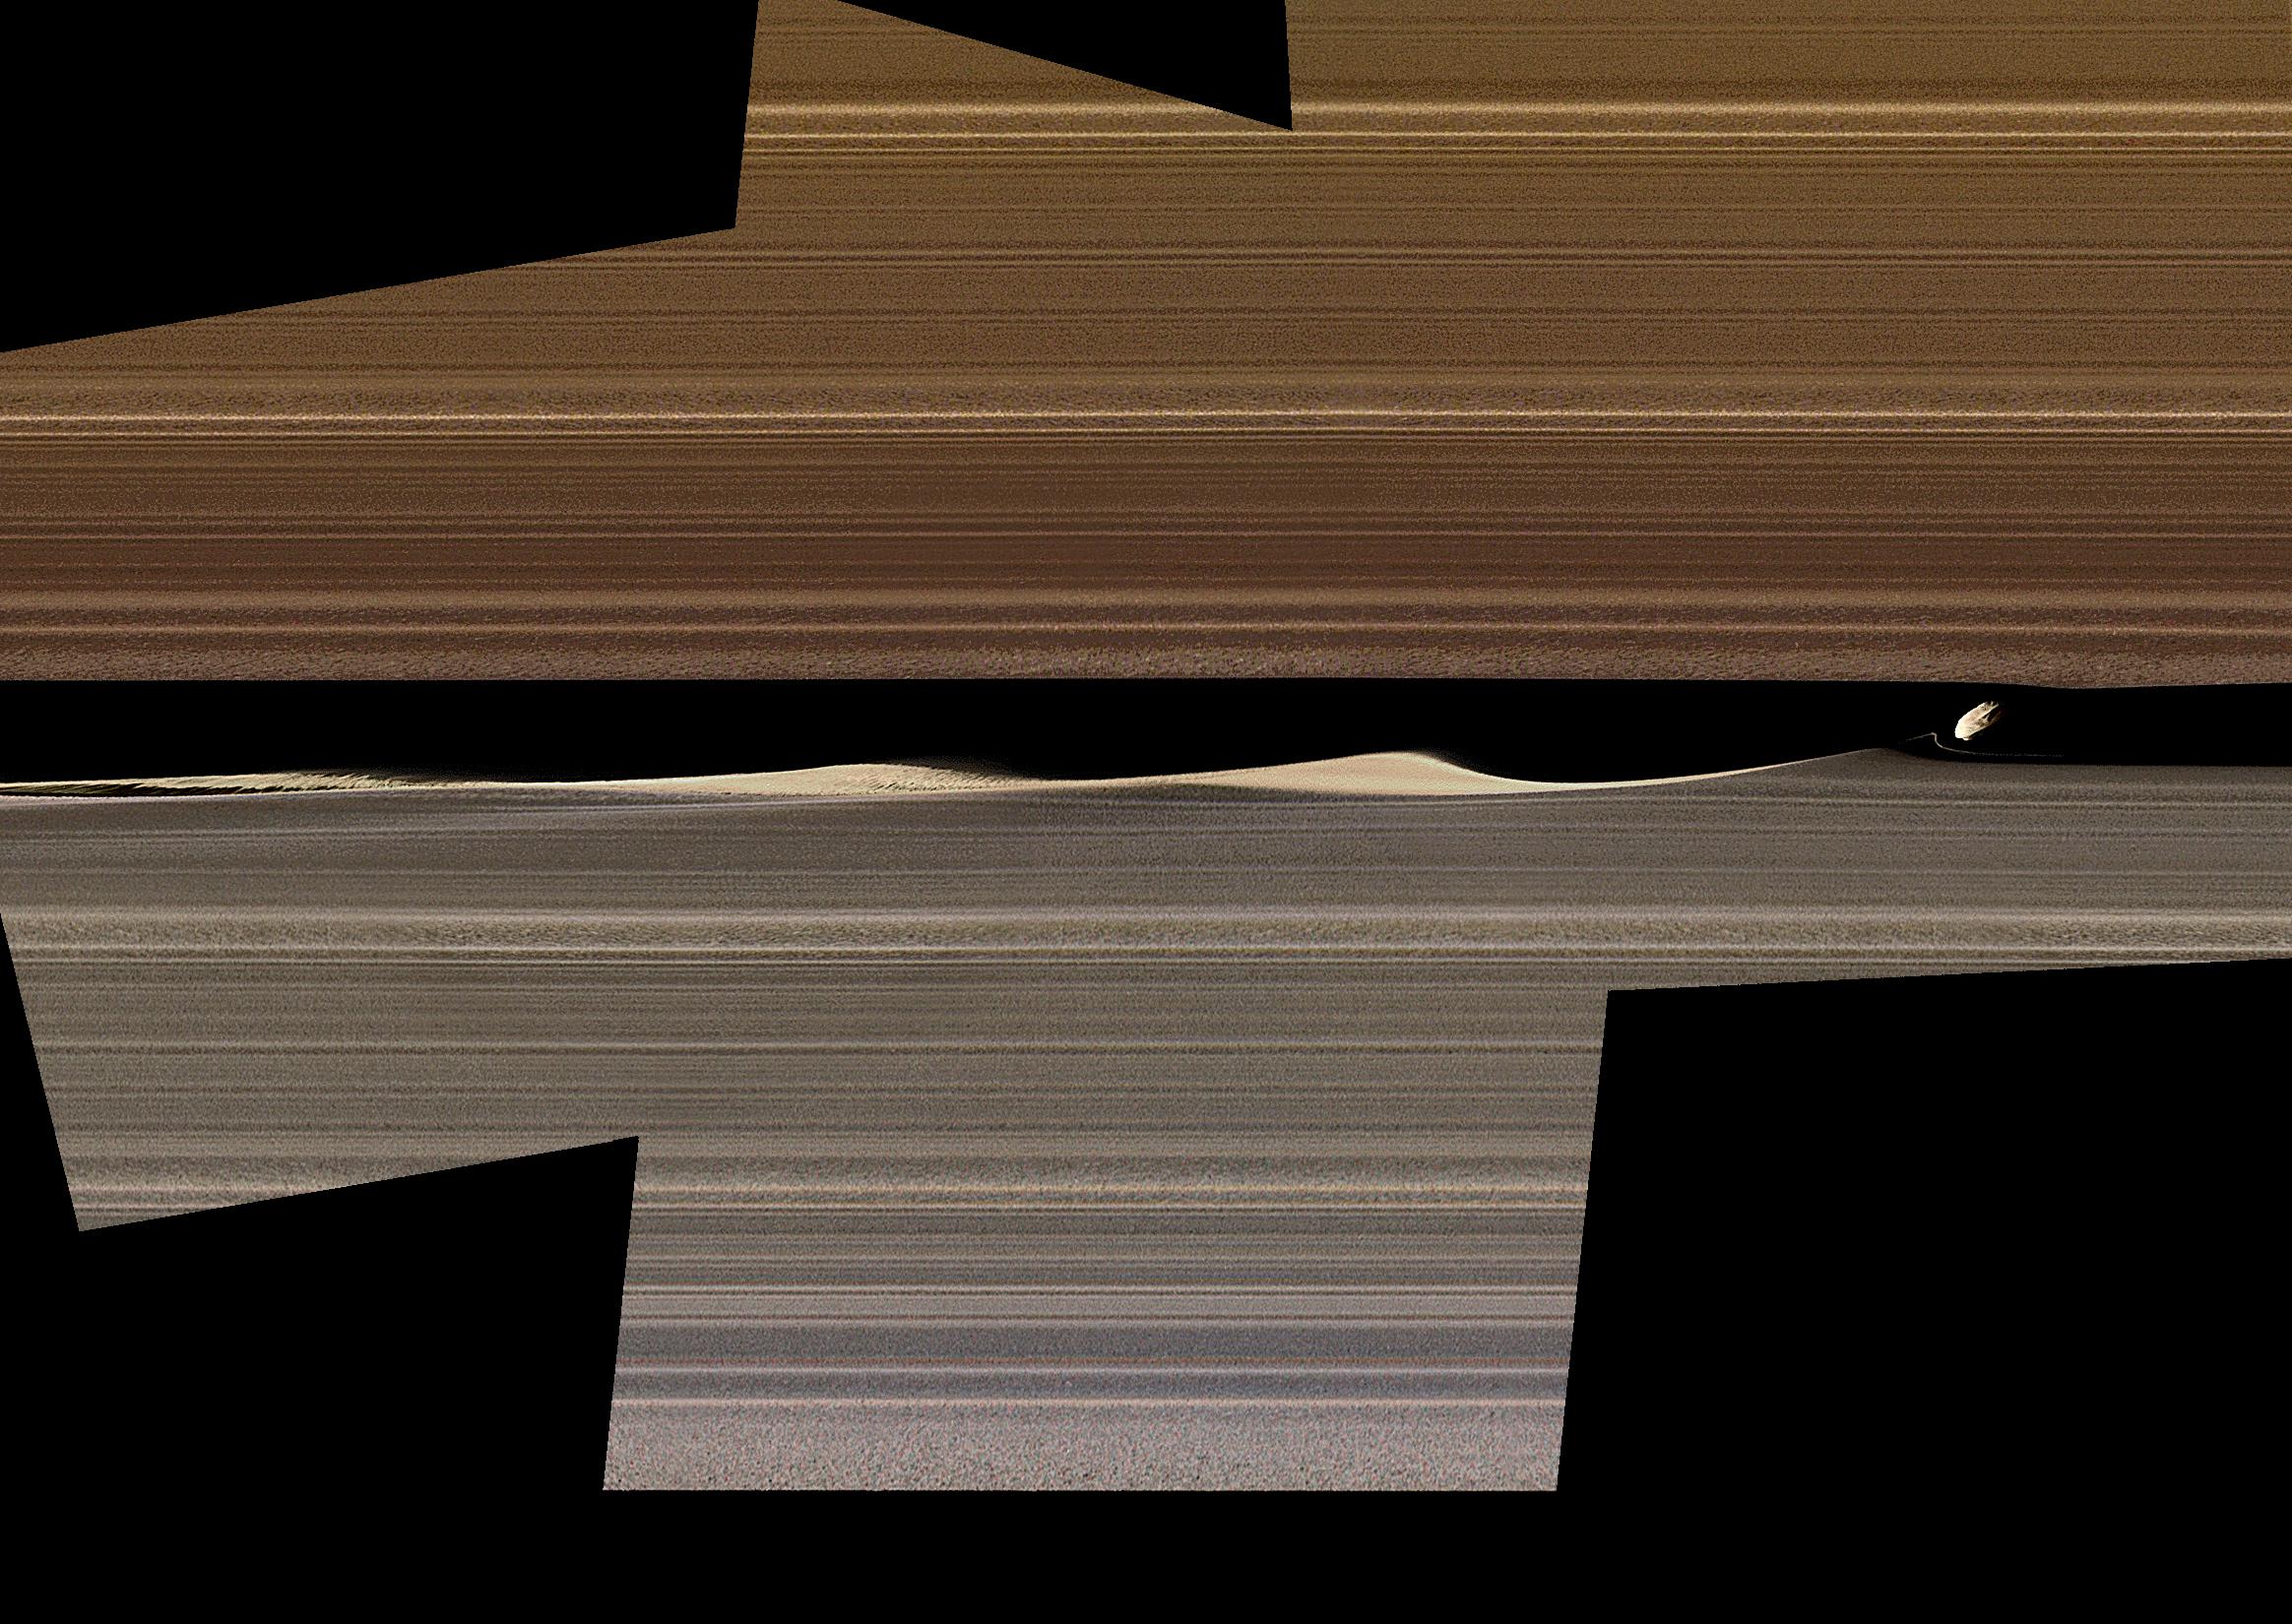 PIA23167: Embedded Moons Sculpt Saturn's Rings